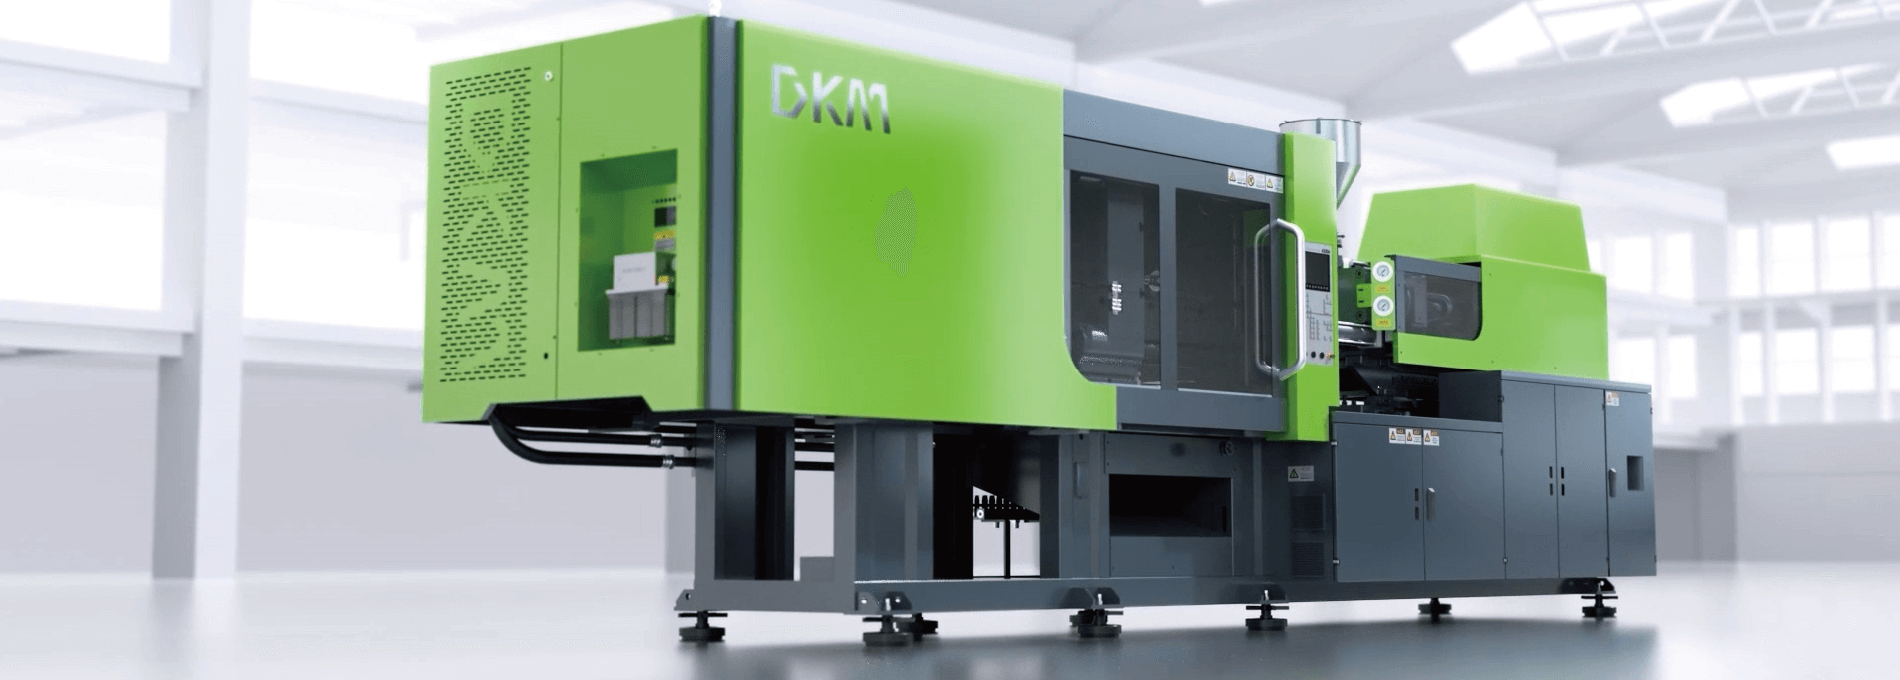 Intelligent Injection Molding Equipment & Devices